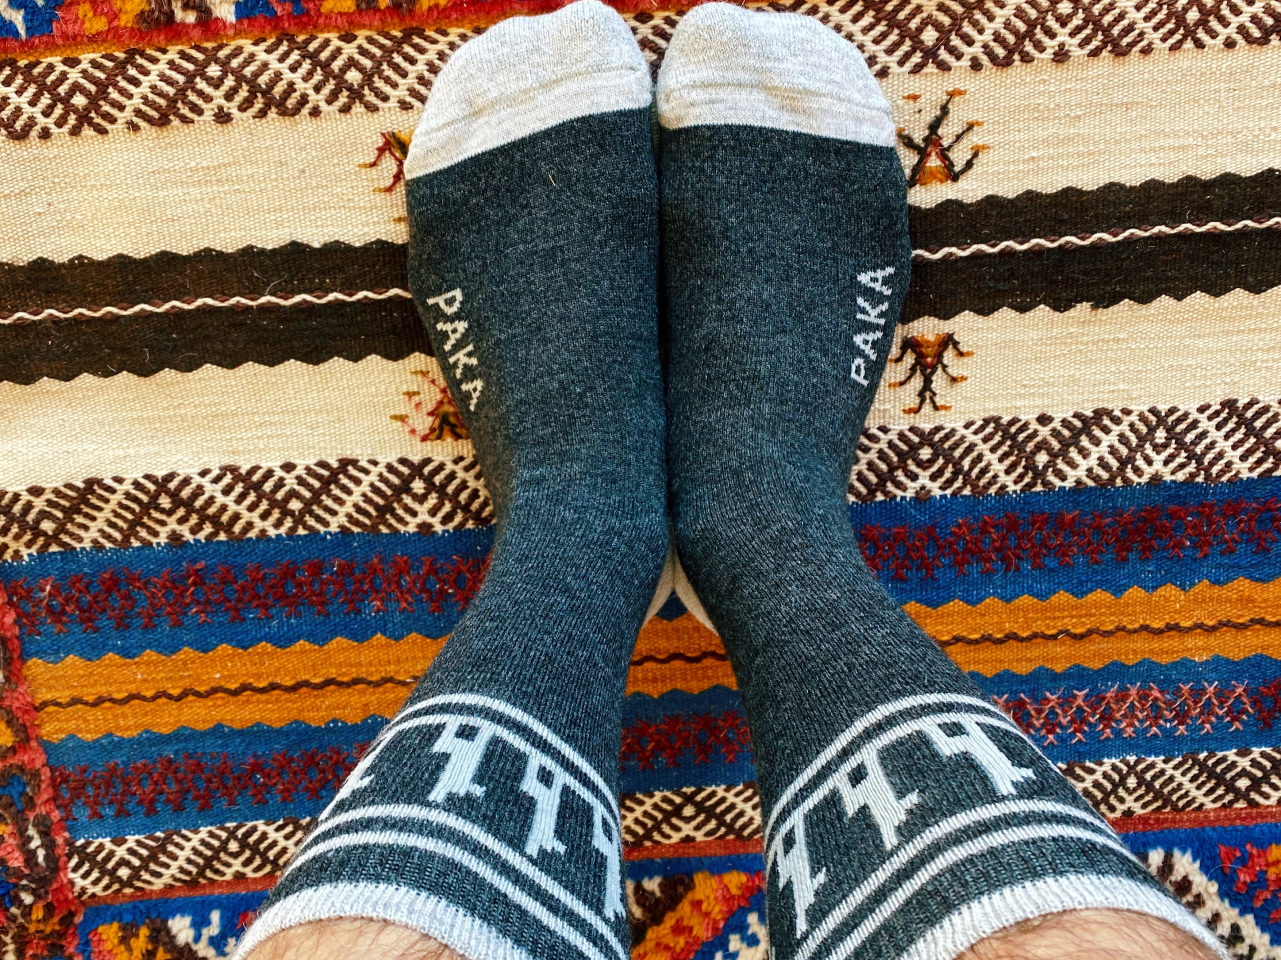 Our Charcoal Costa socks over a on a blanket with funny designs and patterns